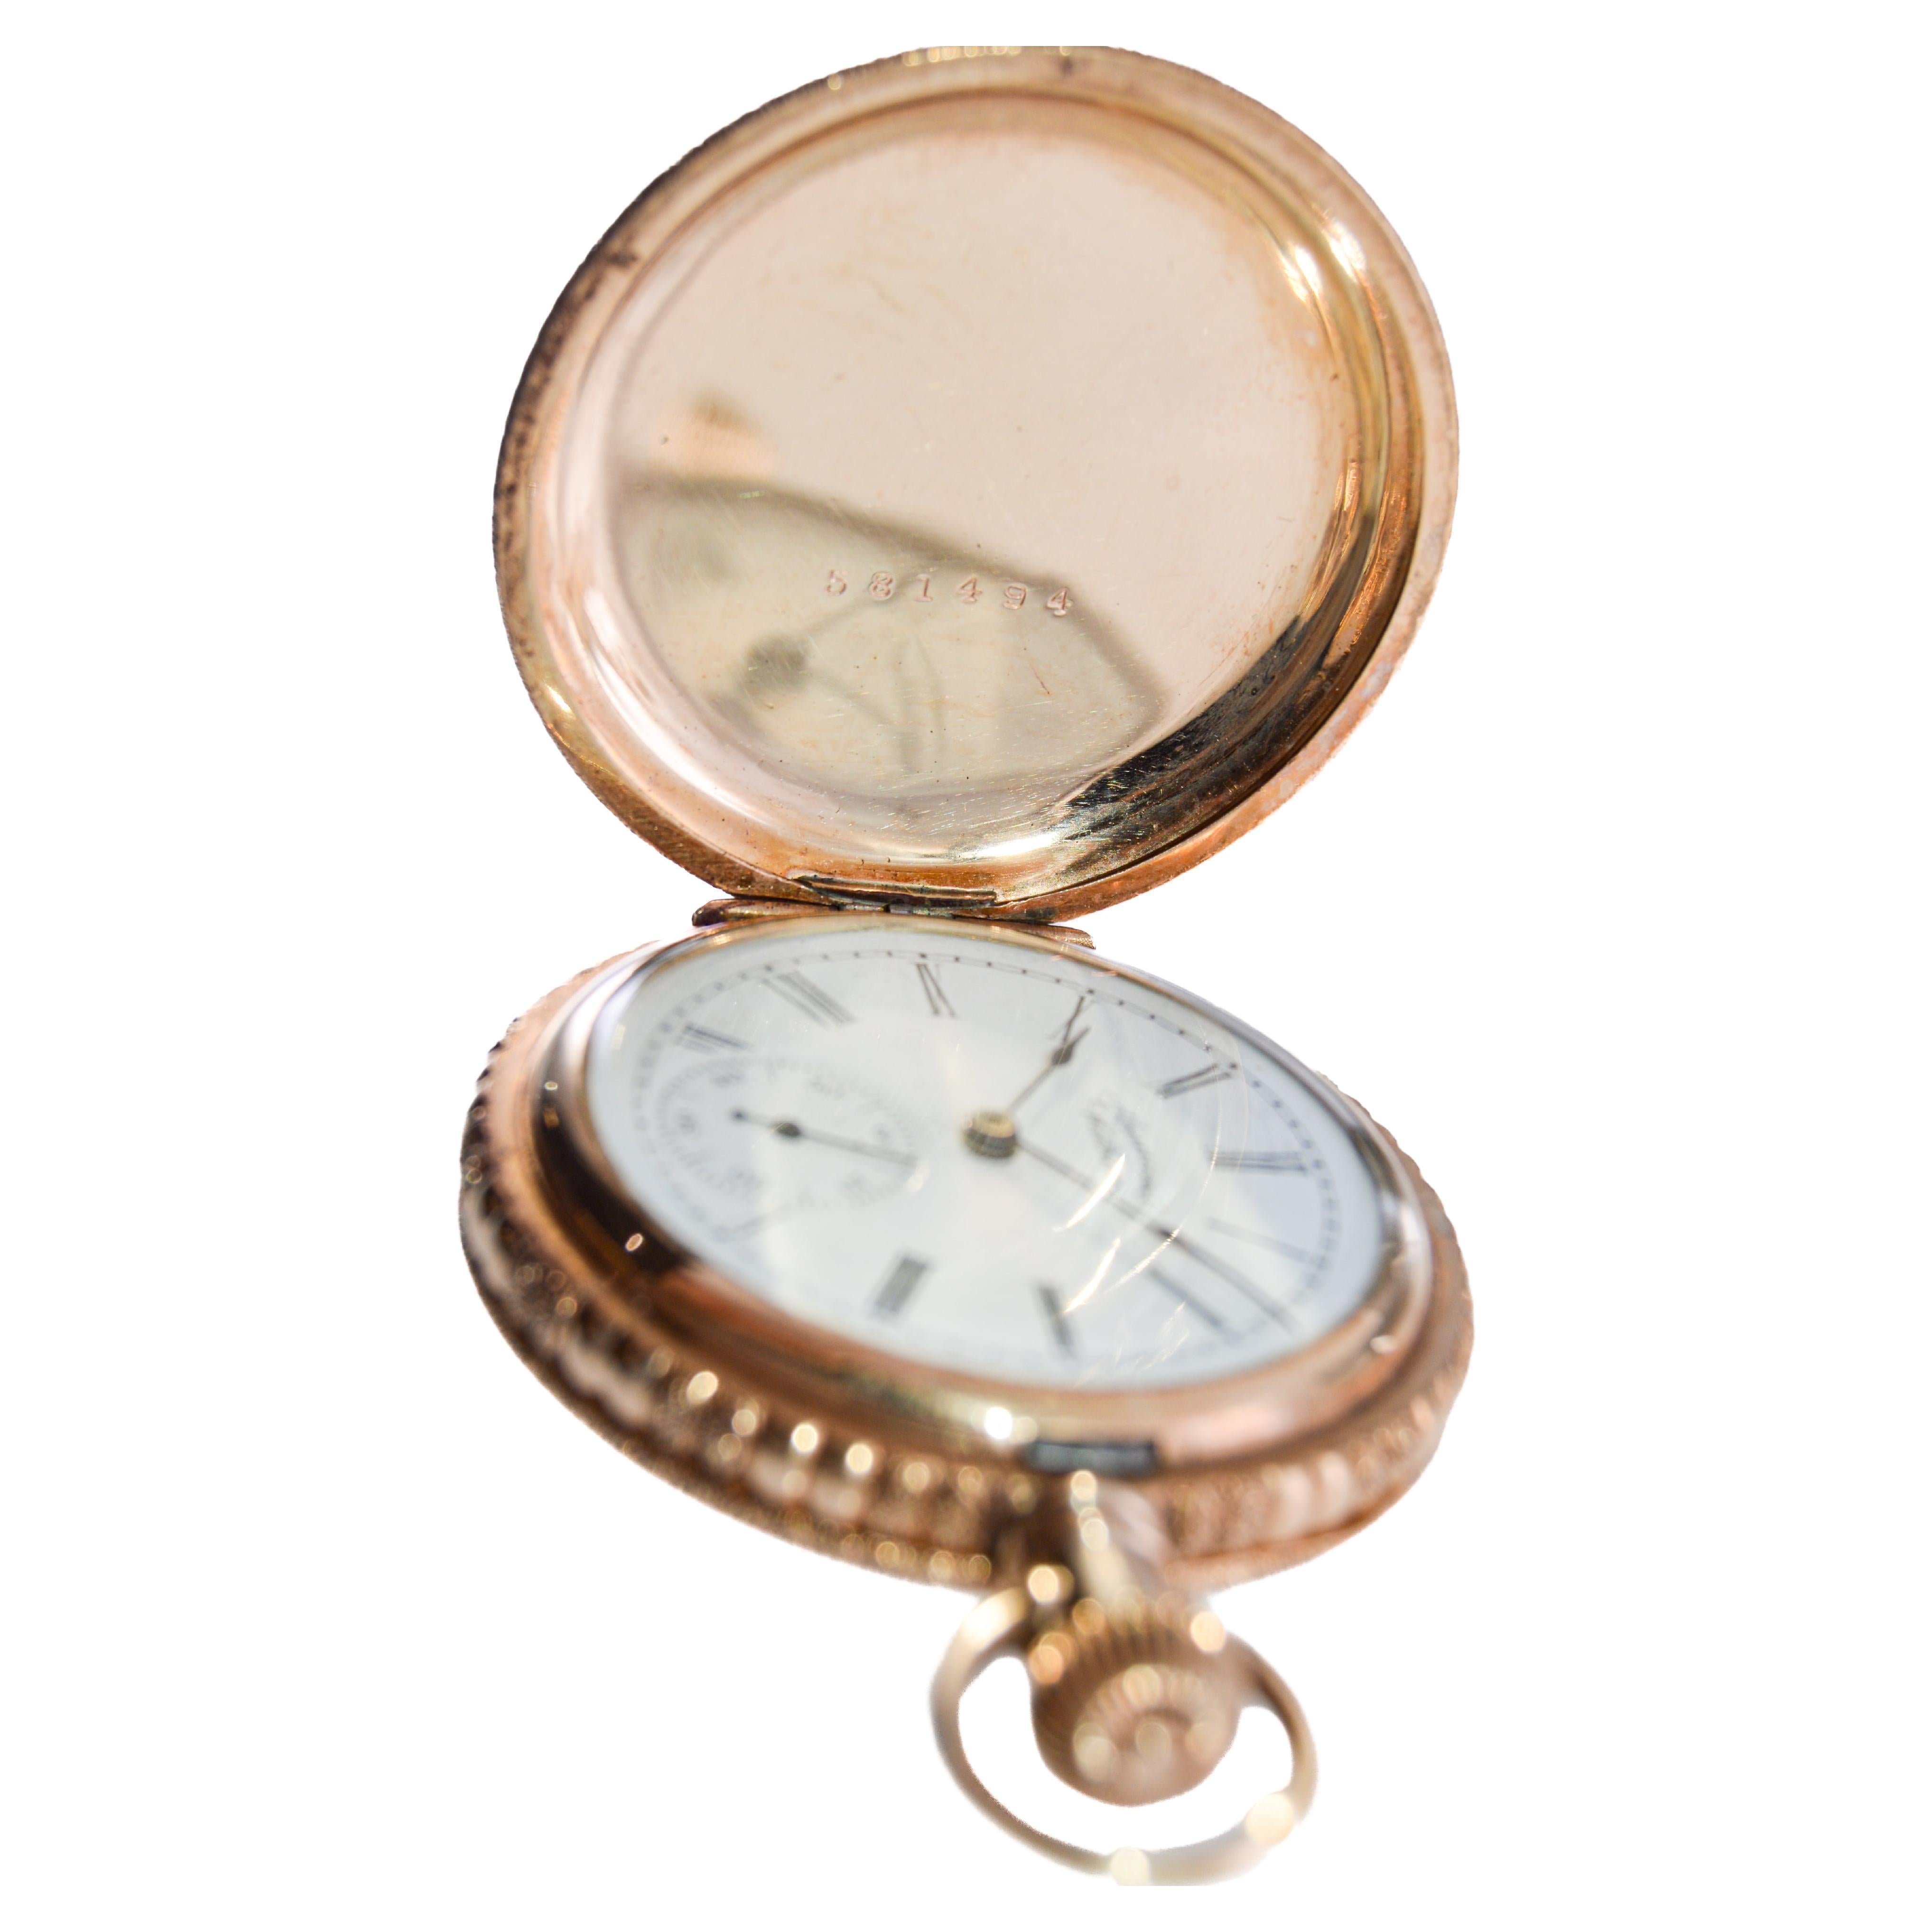 Elgin Gold Filled Pocket Watch From 1891 with Original Kiln Fired Enamel Dial  8